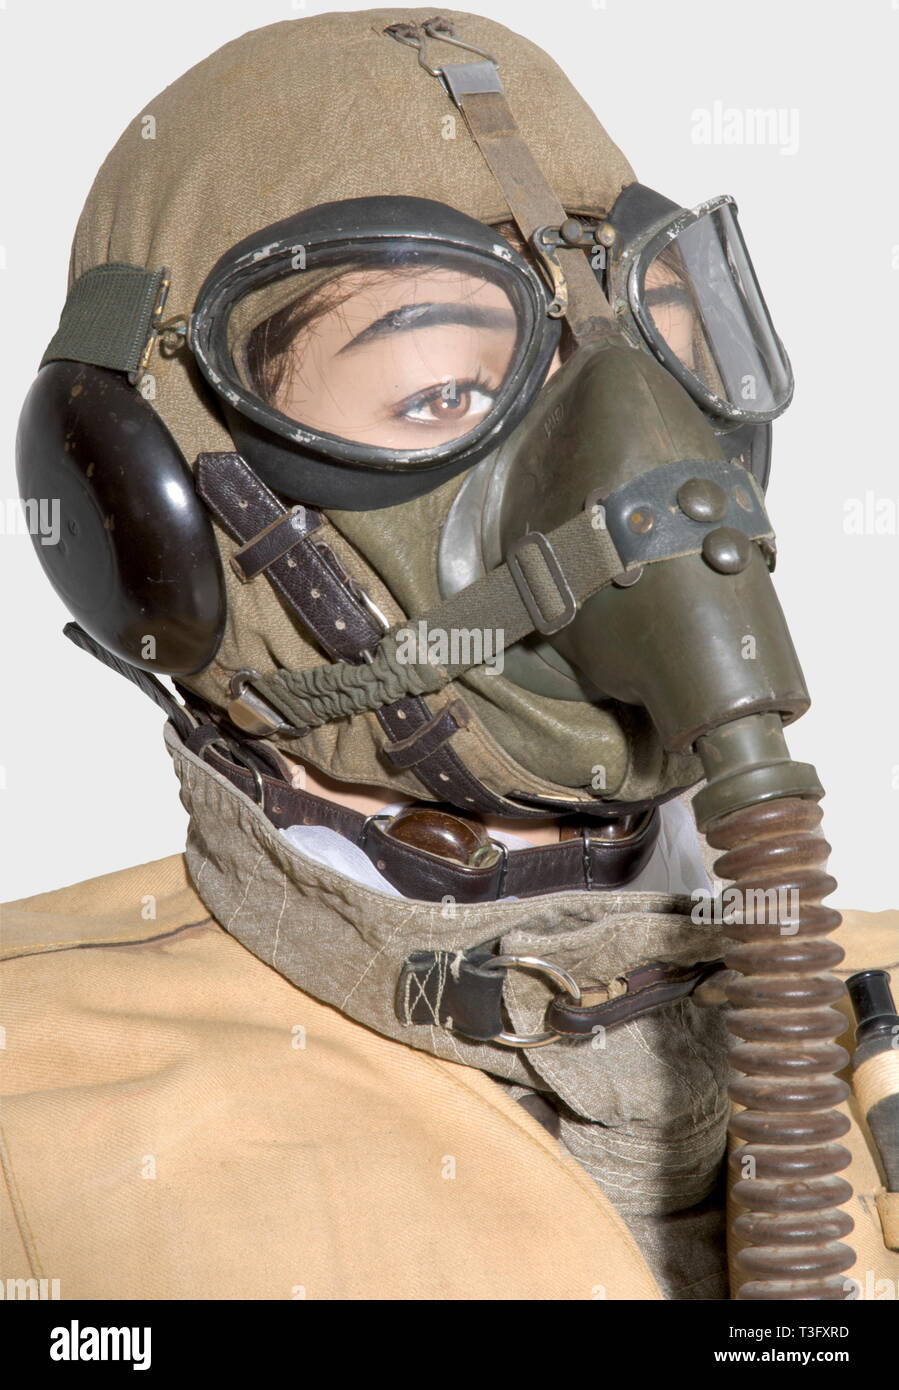 A pilot's uniform ensemble, during the aerial bombing of England, 1940 - 44 A pilot's helmet of sand-coloured linen with brown leather pieces in the very rare early version with the throat microphone on the side, type Siemens Lkp 100, Fl 31216, complete with cable and connector plug. Summer flying suit of sand-coloured linen ('Prym' buttons, 'Zipp' or Rheinnädel' zippers, repairs in places). Pilot's white silk scarf. Dark leather, fur-lined flying boots, early model with two zippers (repaired in places). Long, brown leather, pilot's historic, historical, people, 1930s, 20th, Editorial-Use-Only Stock Photo